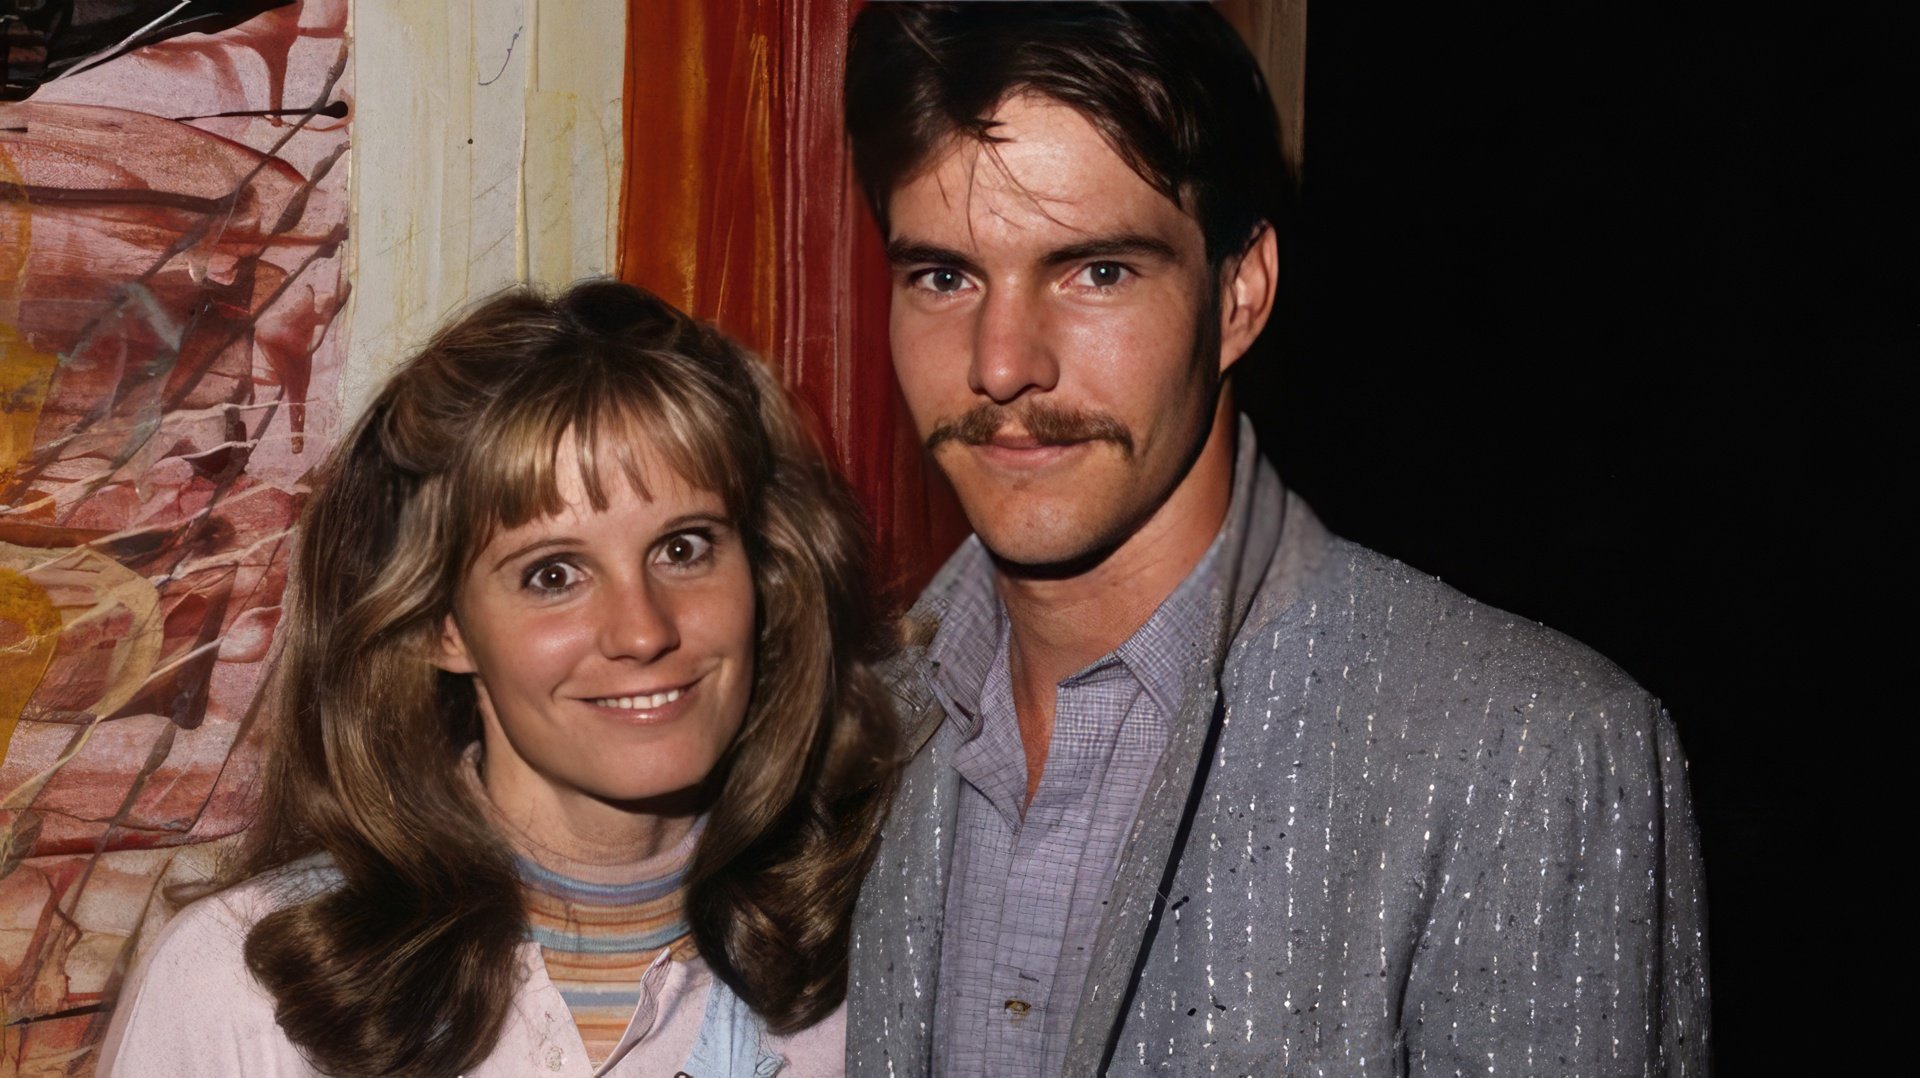 With his first wife P.J. Soles